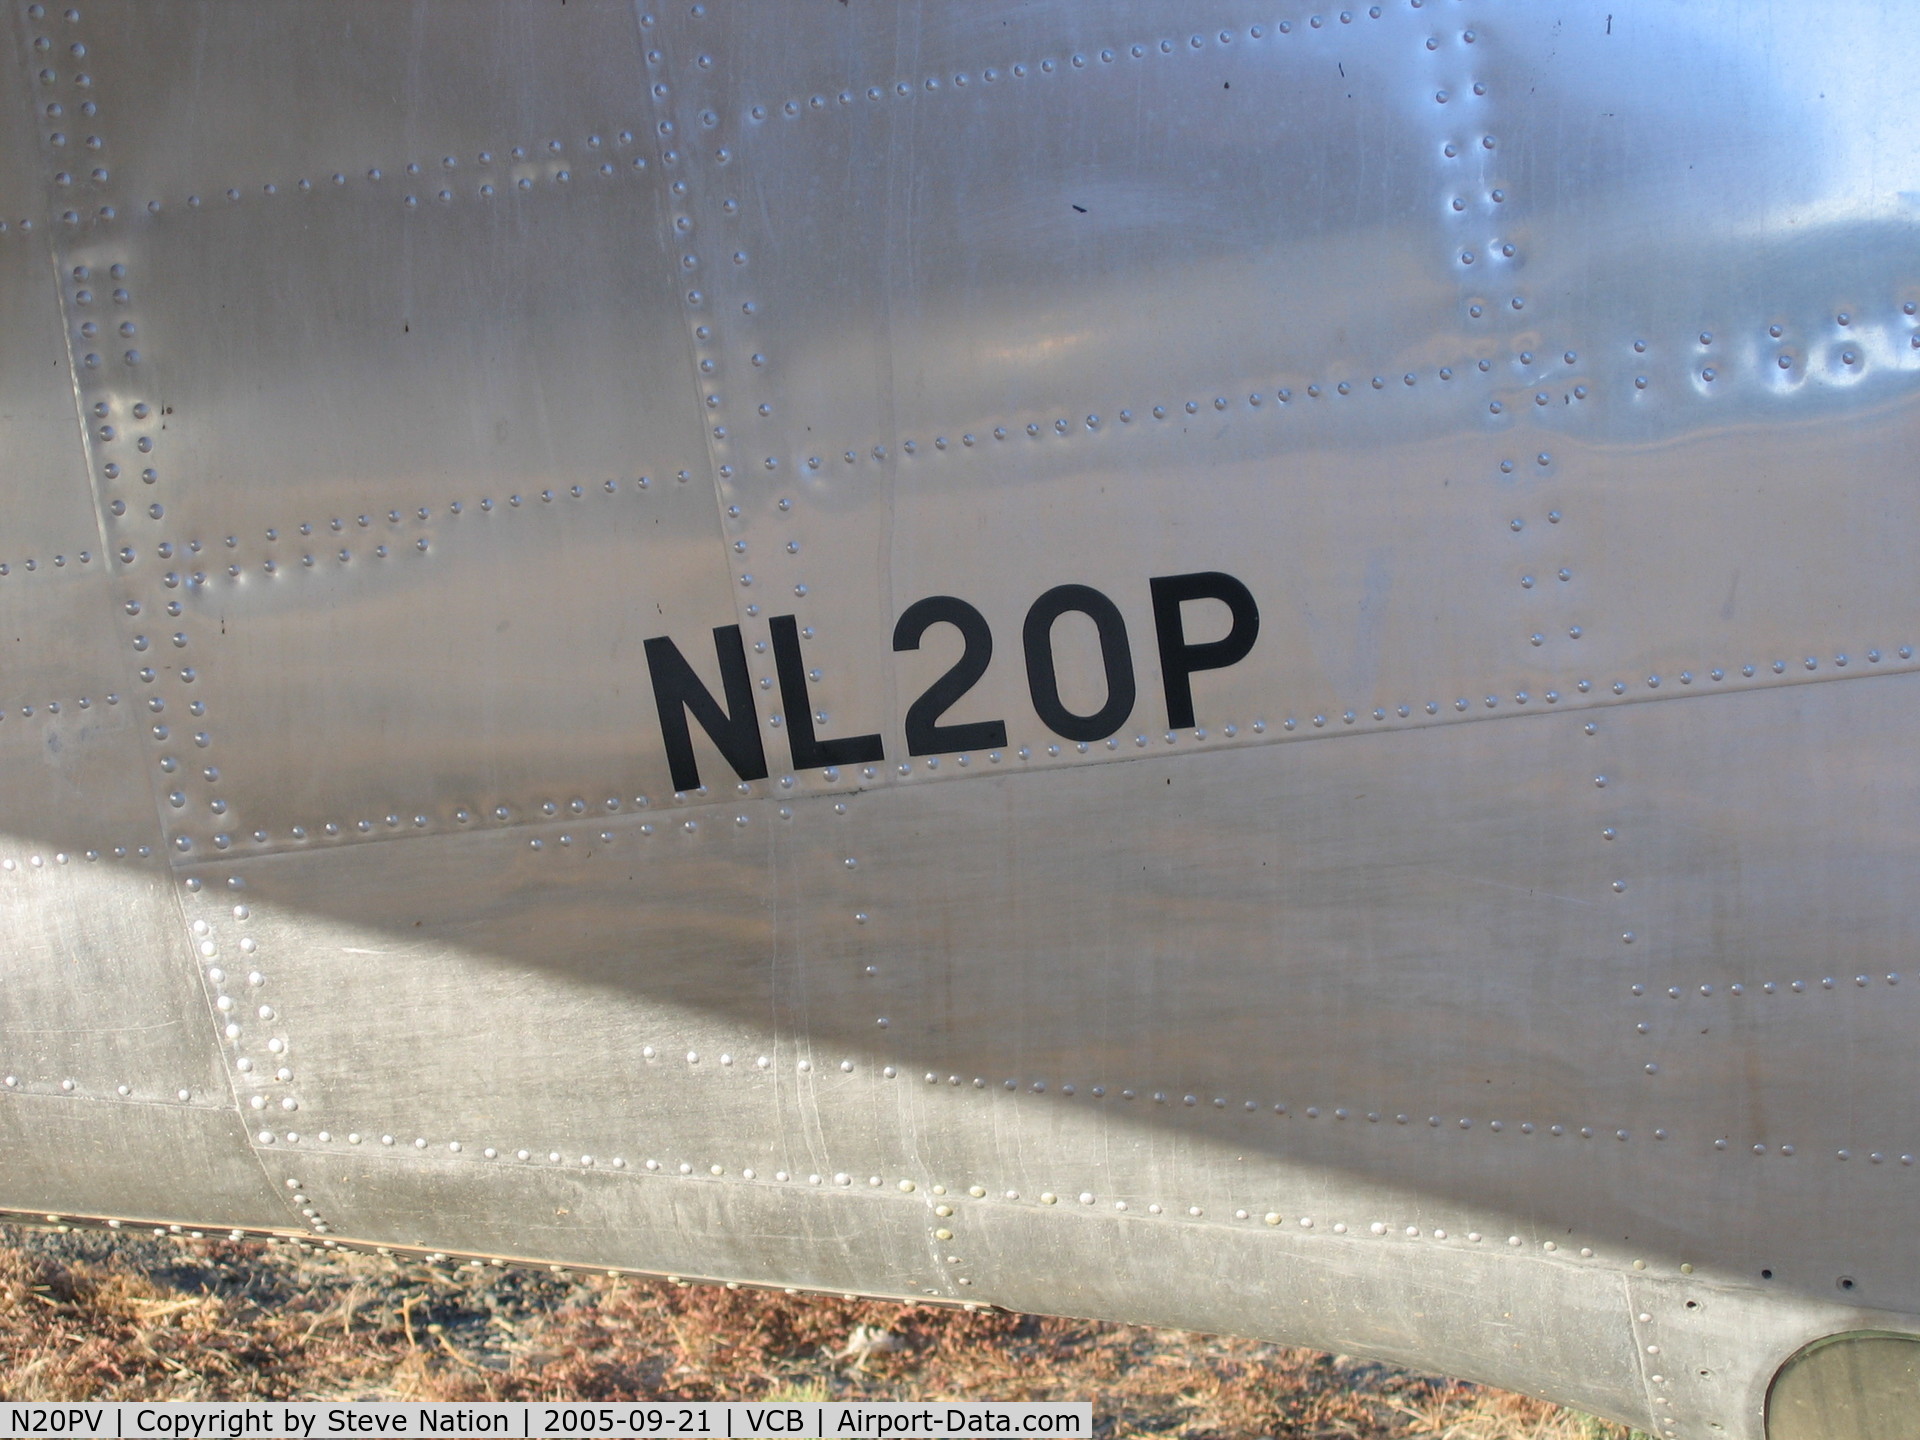 N20PV, 1944 Lockheed PV-2 Harpoon C/N 15-1490, close-up showing incorrect registration painted on 1944 Lockheed PV-2 (marked as NL20P, not NL20PV) at Nut Tree Airport, Vacaville, CA